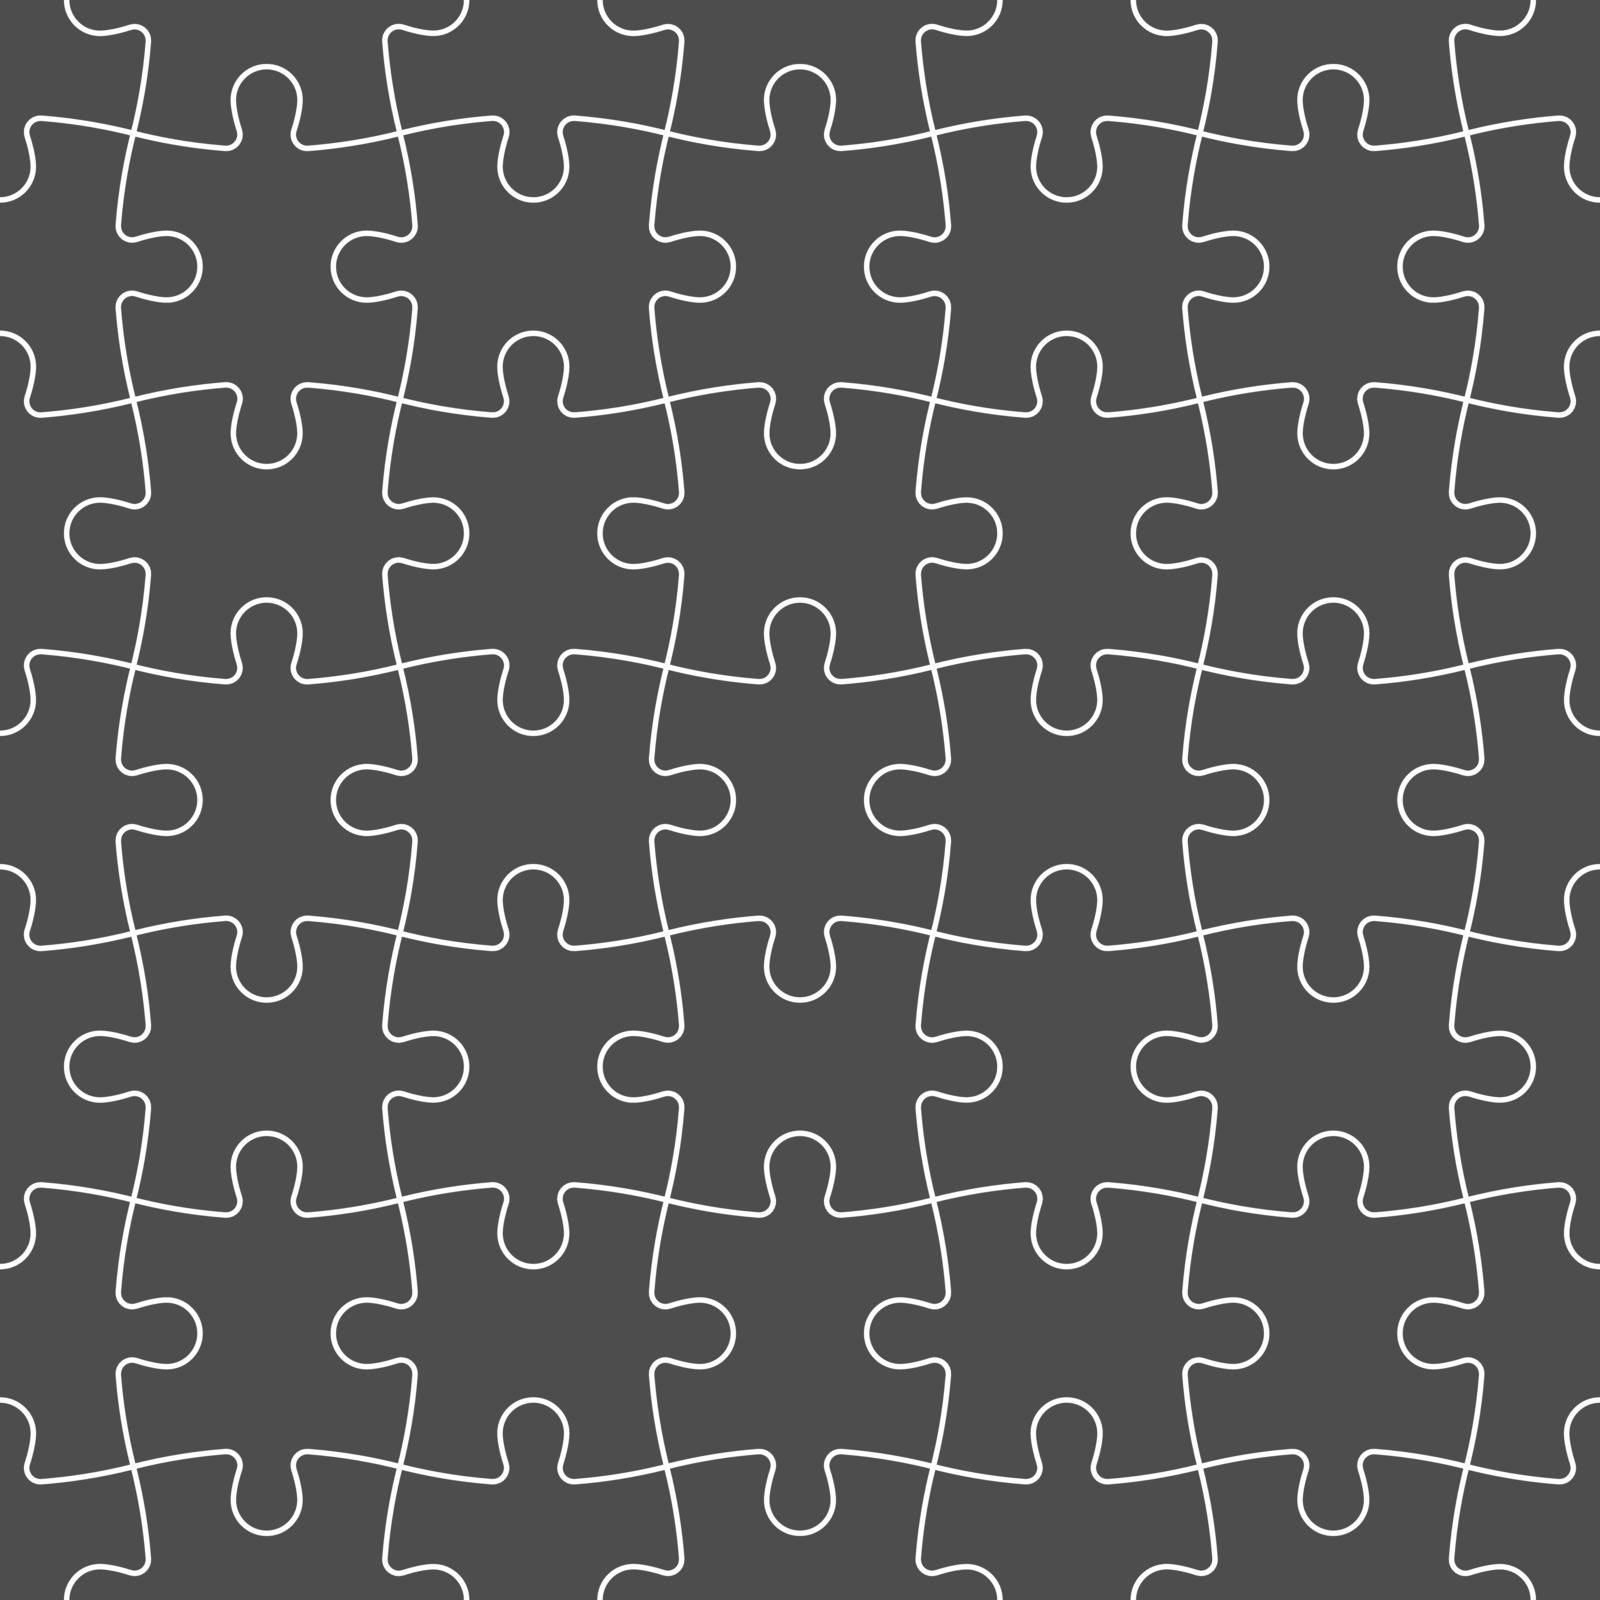 Jigsaw puzzle seamless background. Mosaic of grey puzzle pieces with white outline in linear arrangement. Simple flat vector illustration.